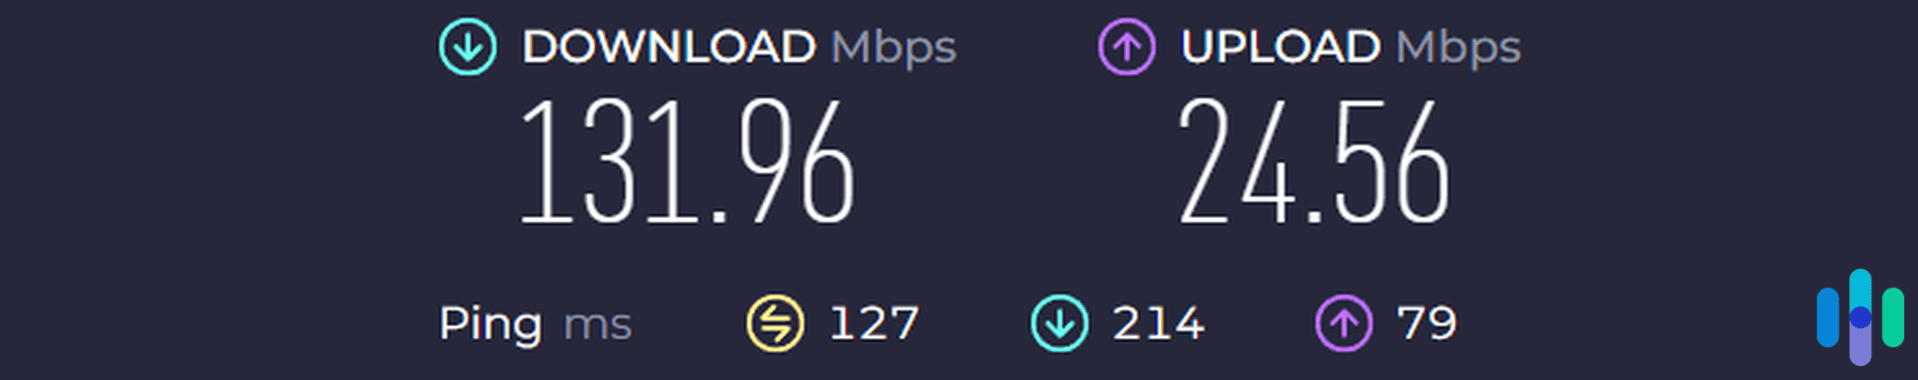 Our internet speed while connected to a 3,000 Mbps VPN Gate server in Japan.